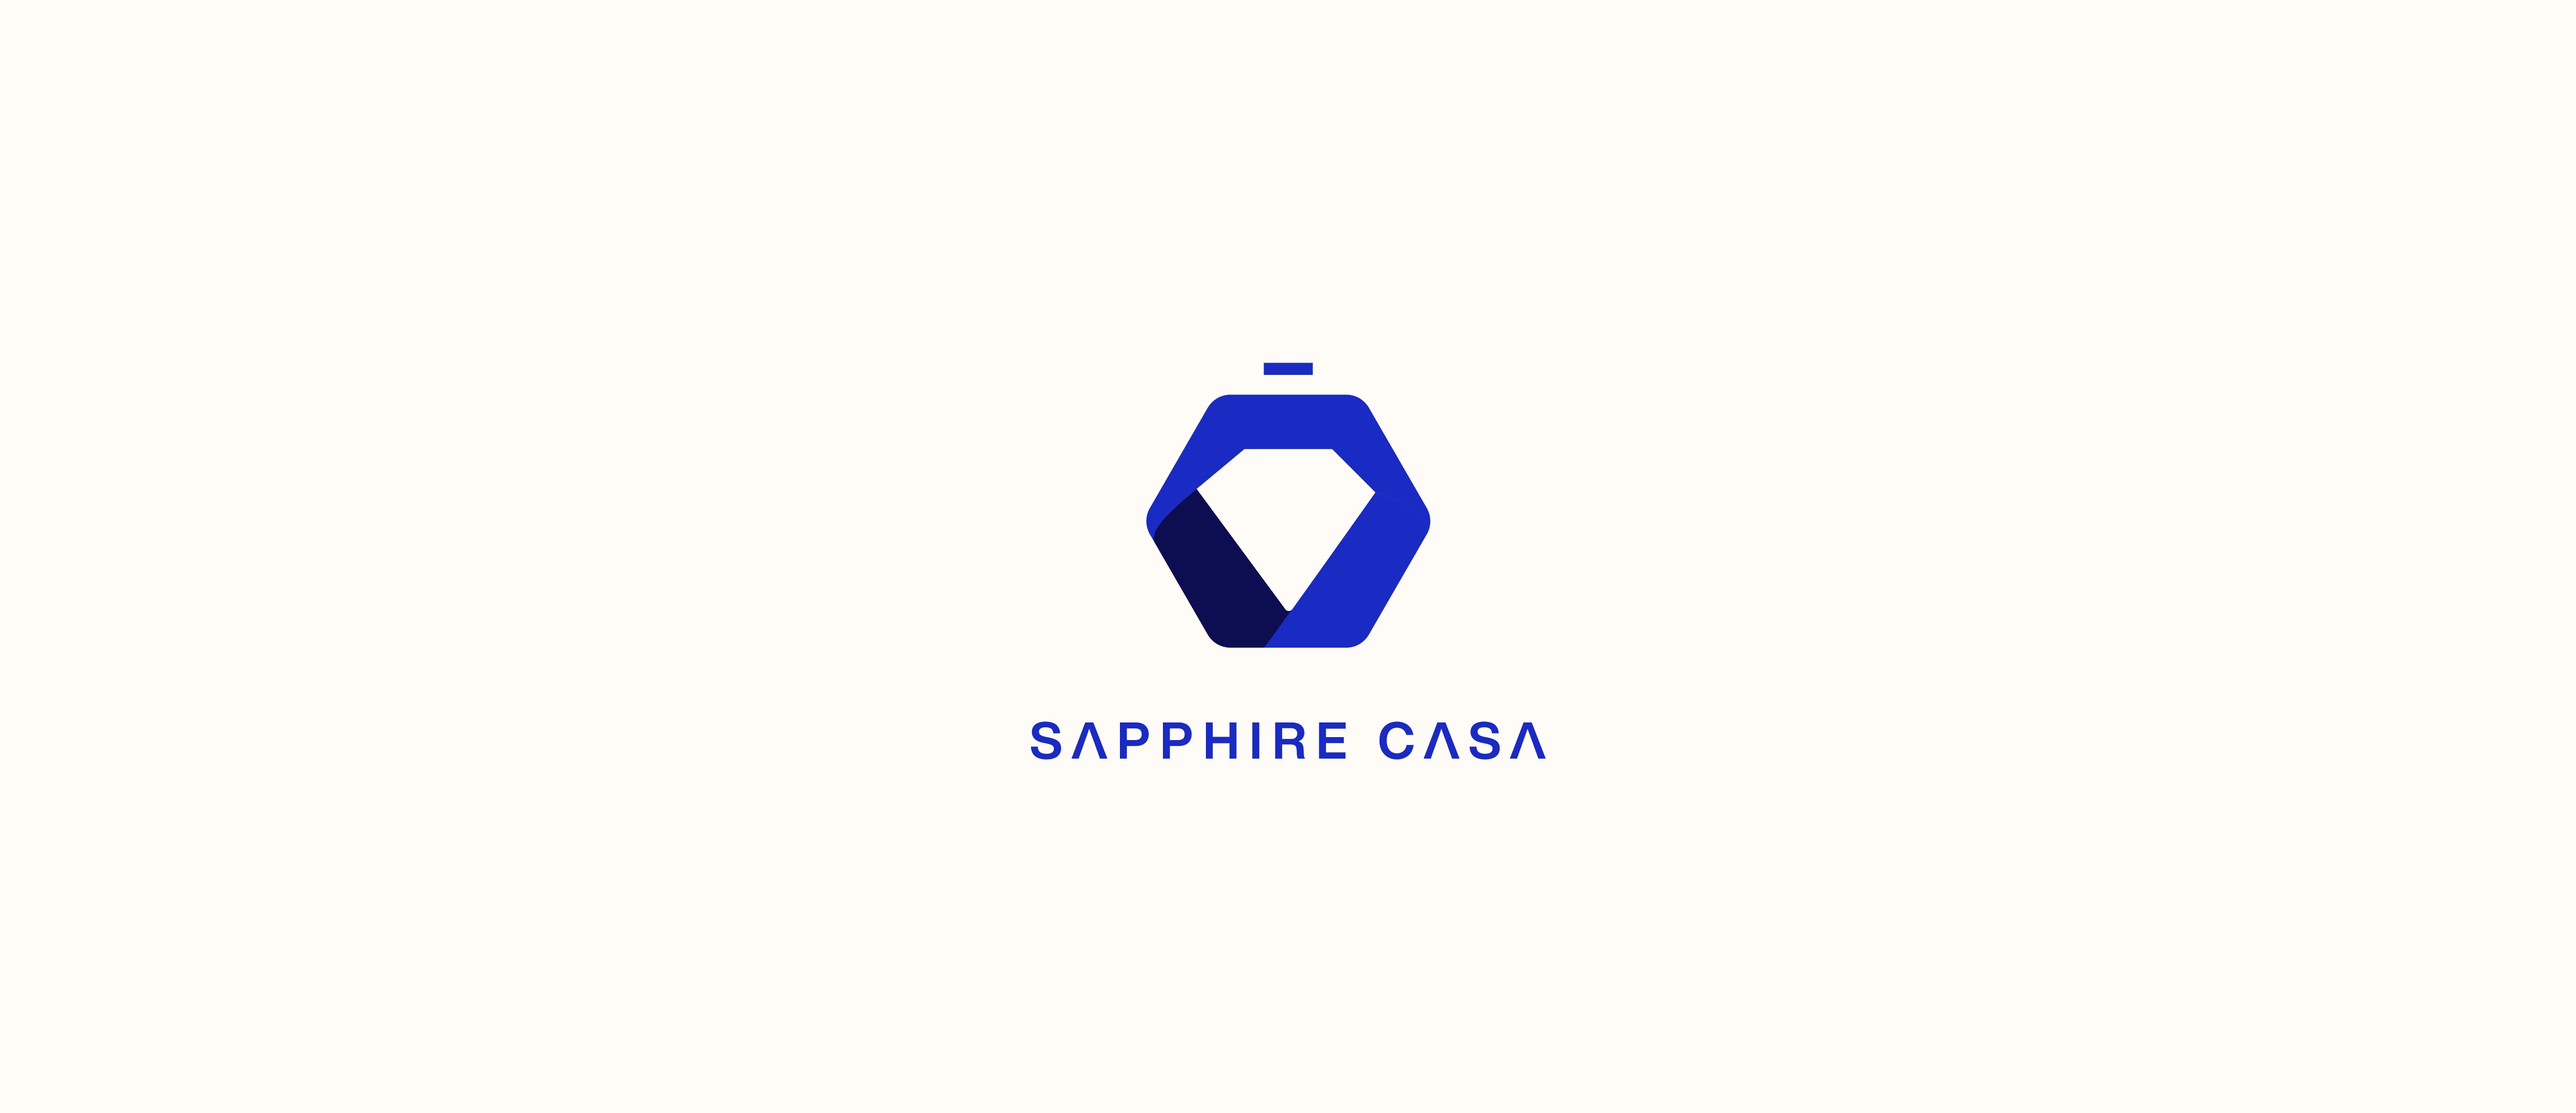 Branding and Visual Identity for Sapphire Casa